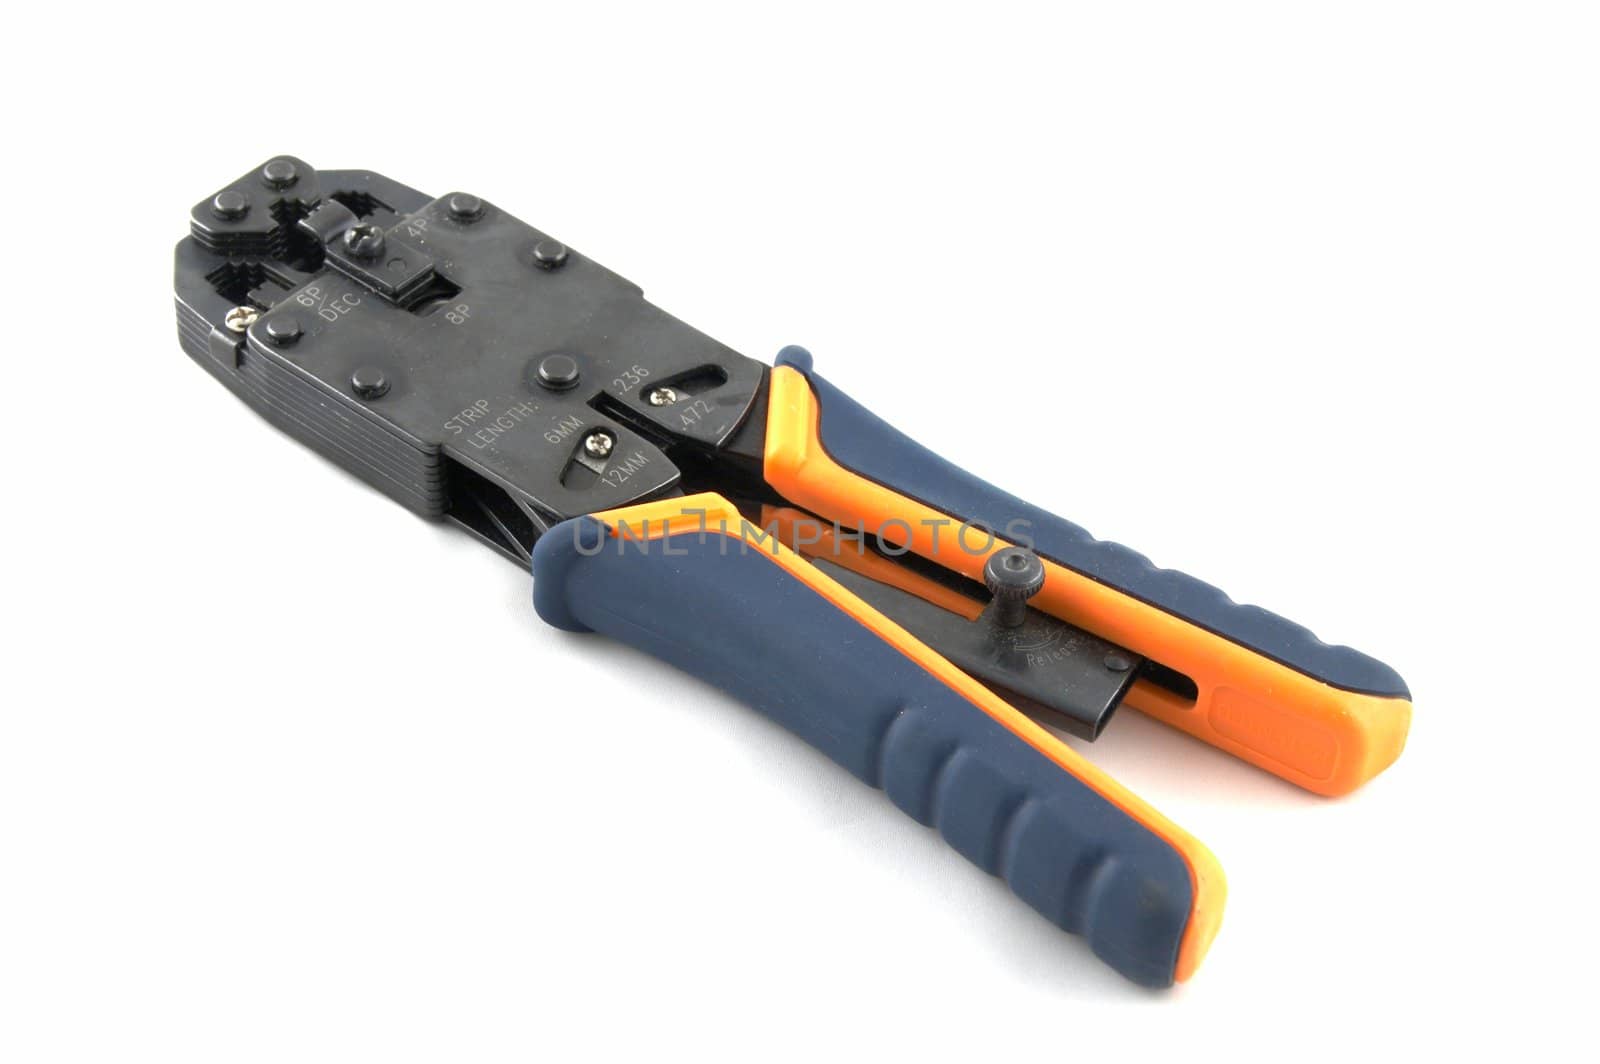 Crimp tool, used for attaching RJ-45 or RJ-11 connectors to computer network cables.